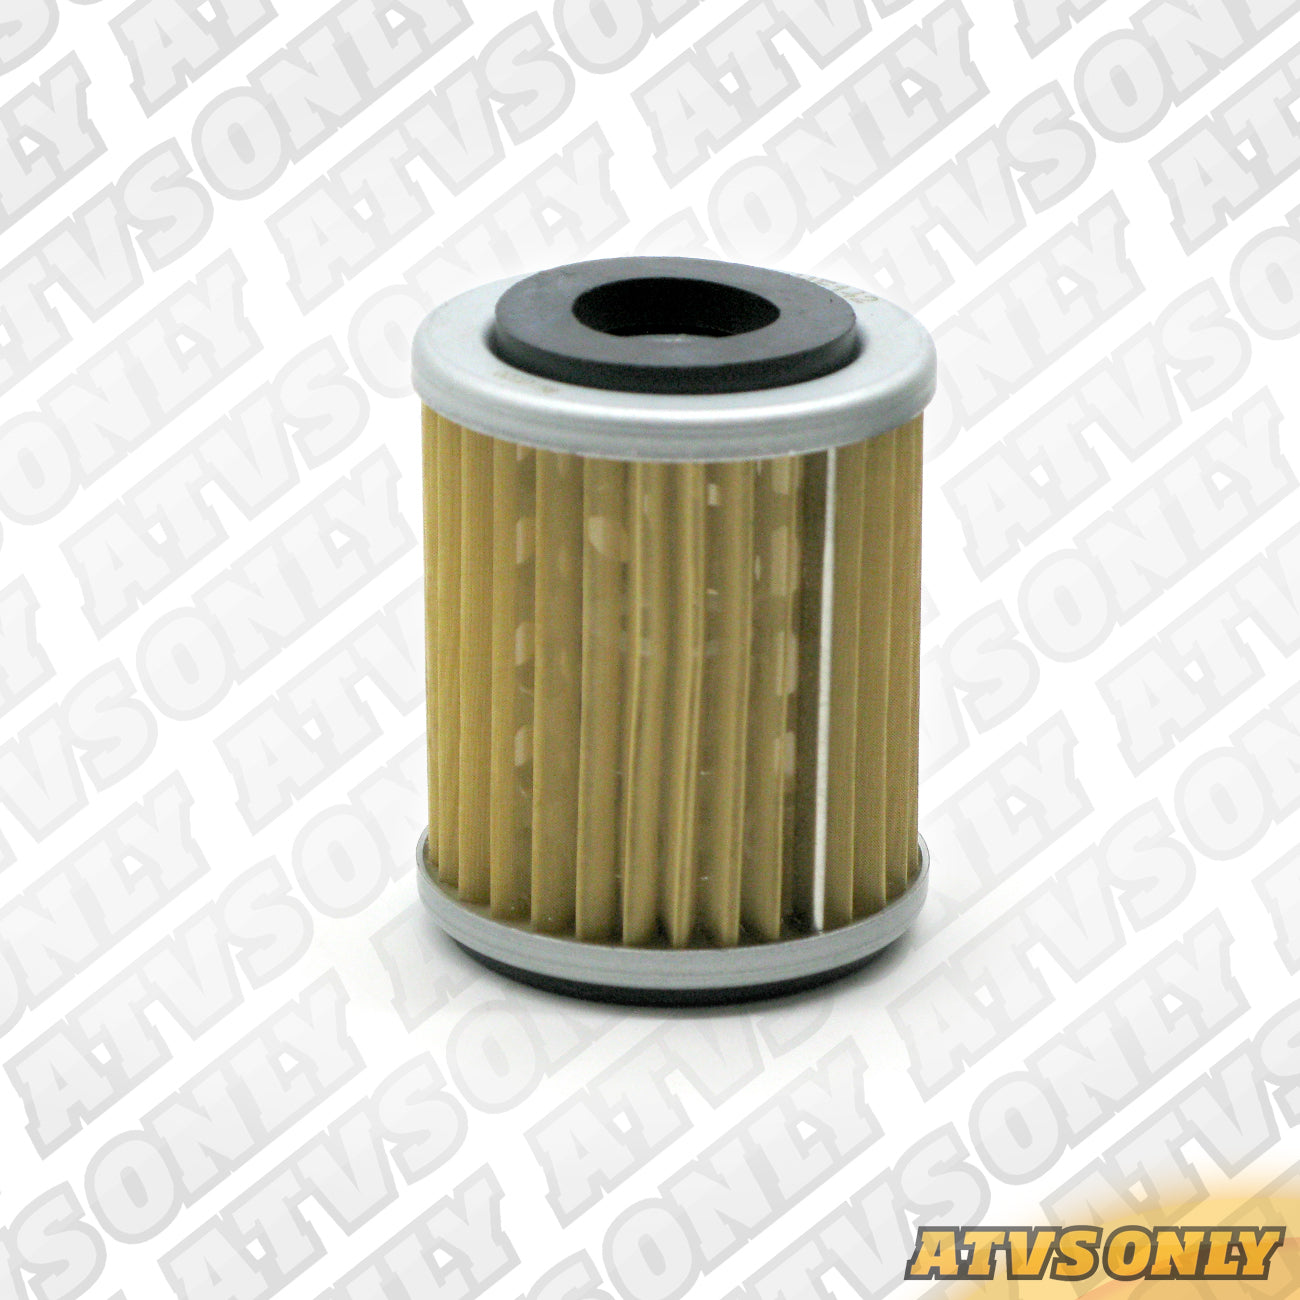 Oil Filter for Yamaha Applications – ATVS Only